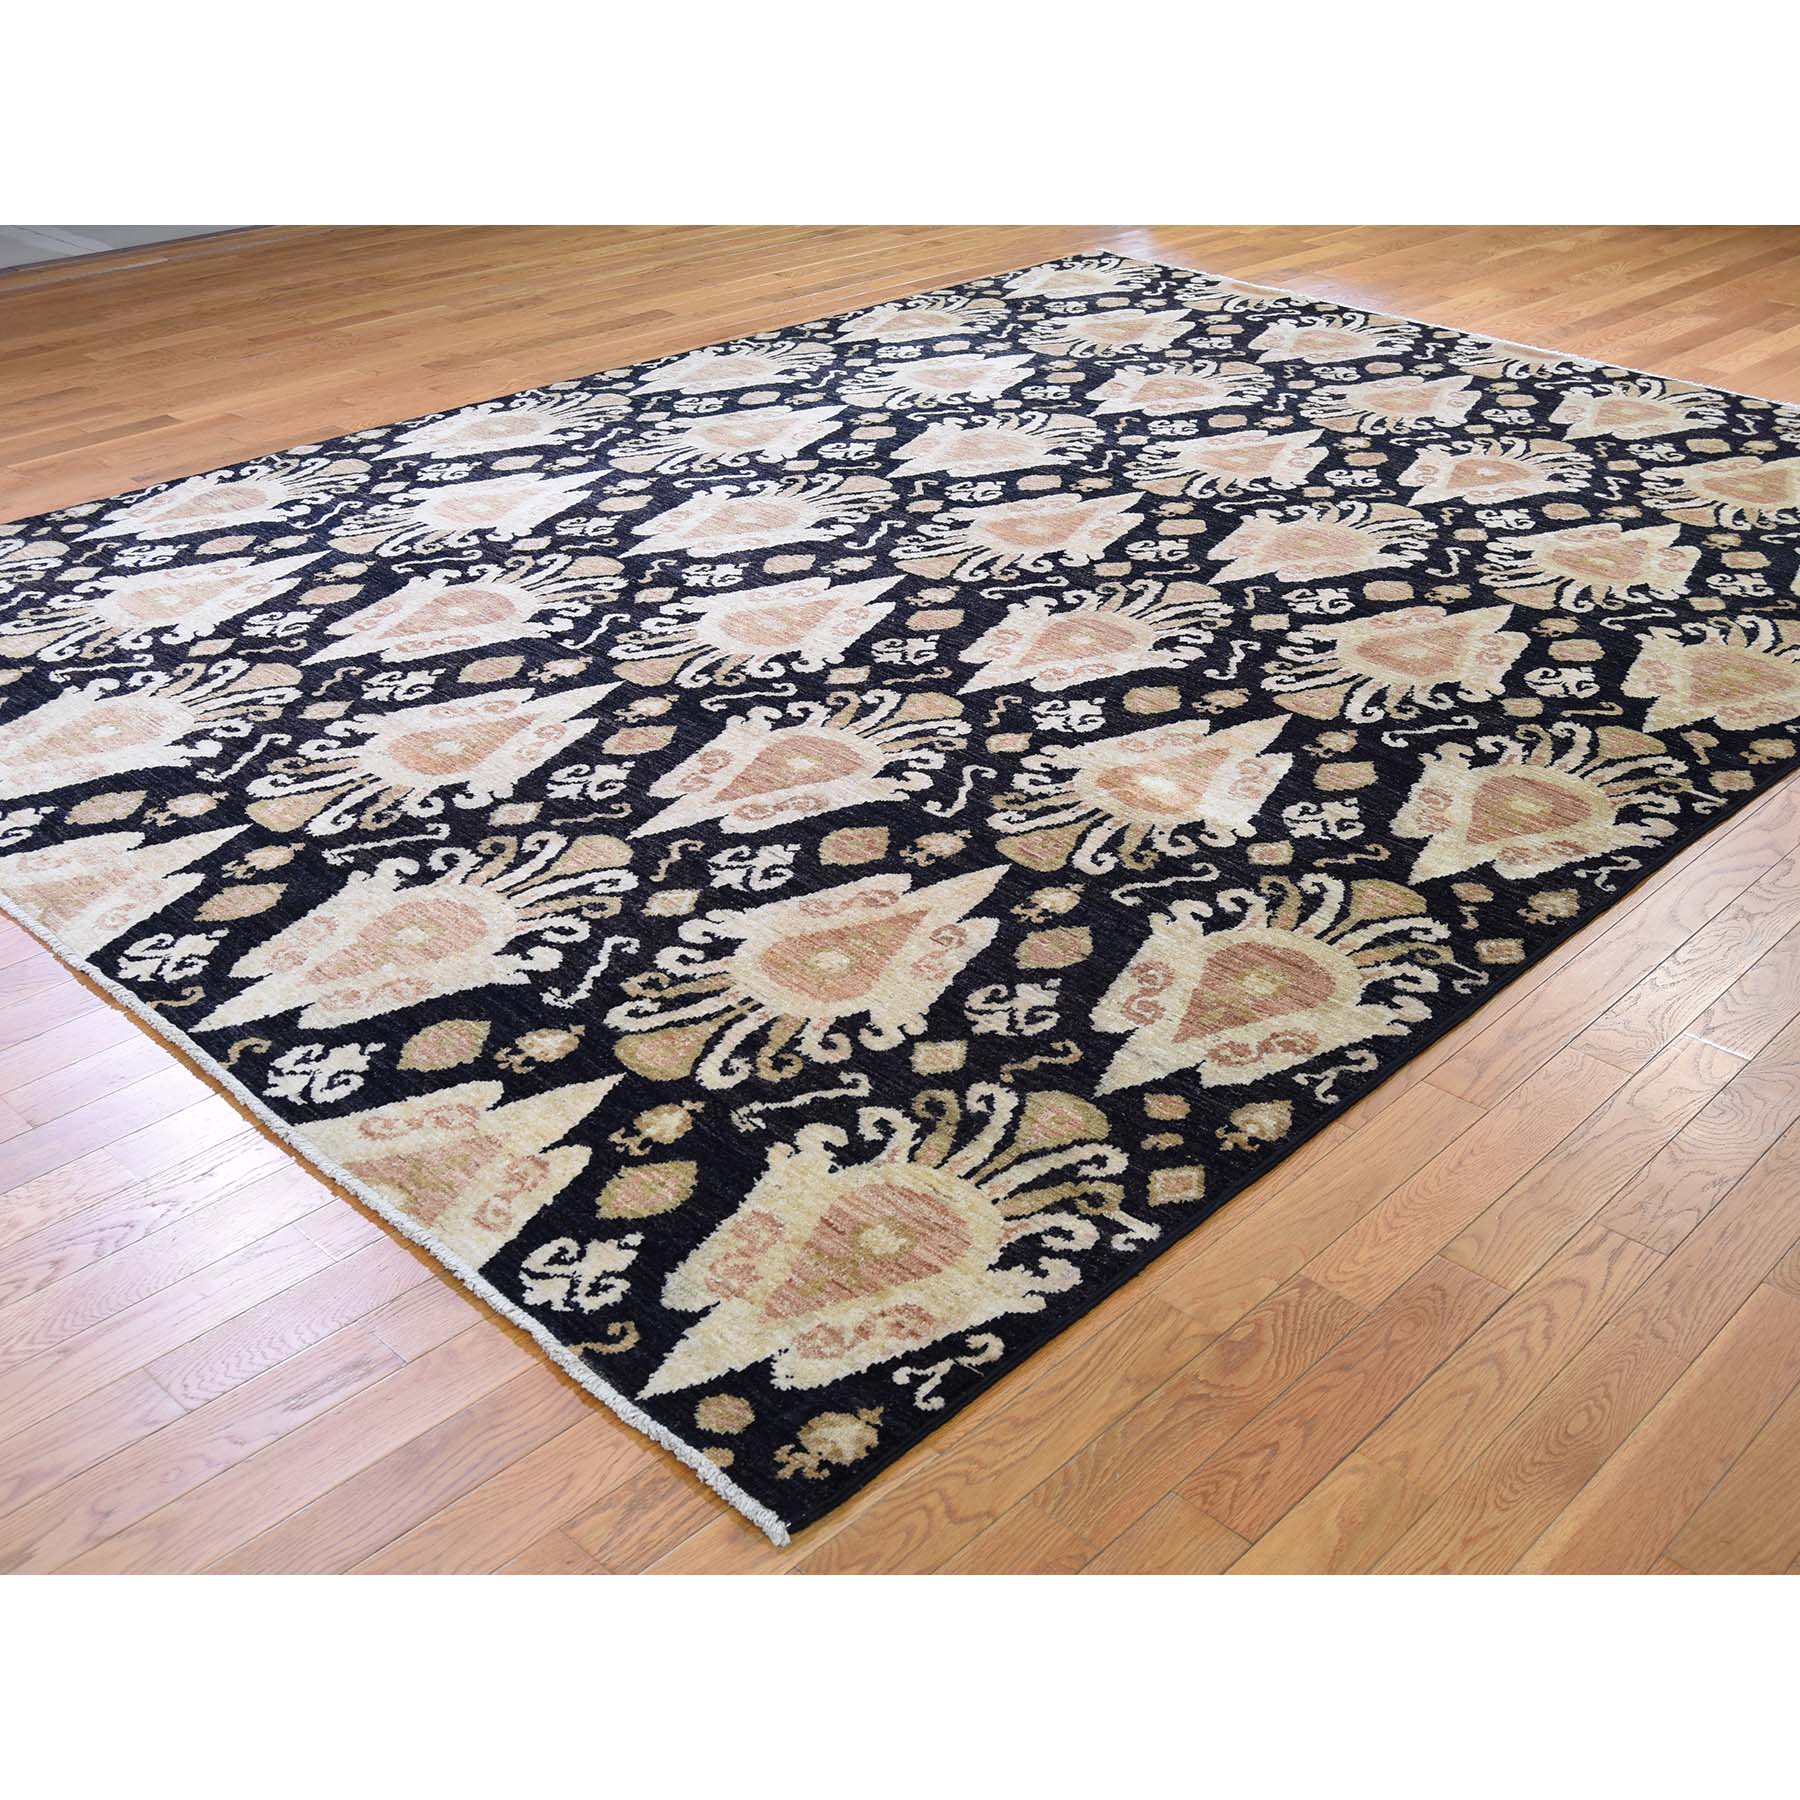 9-2 x12-4  Black Ikat Pure Wool Hand-Knotted Oriental Rug 